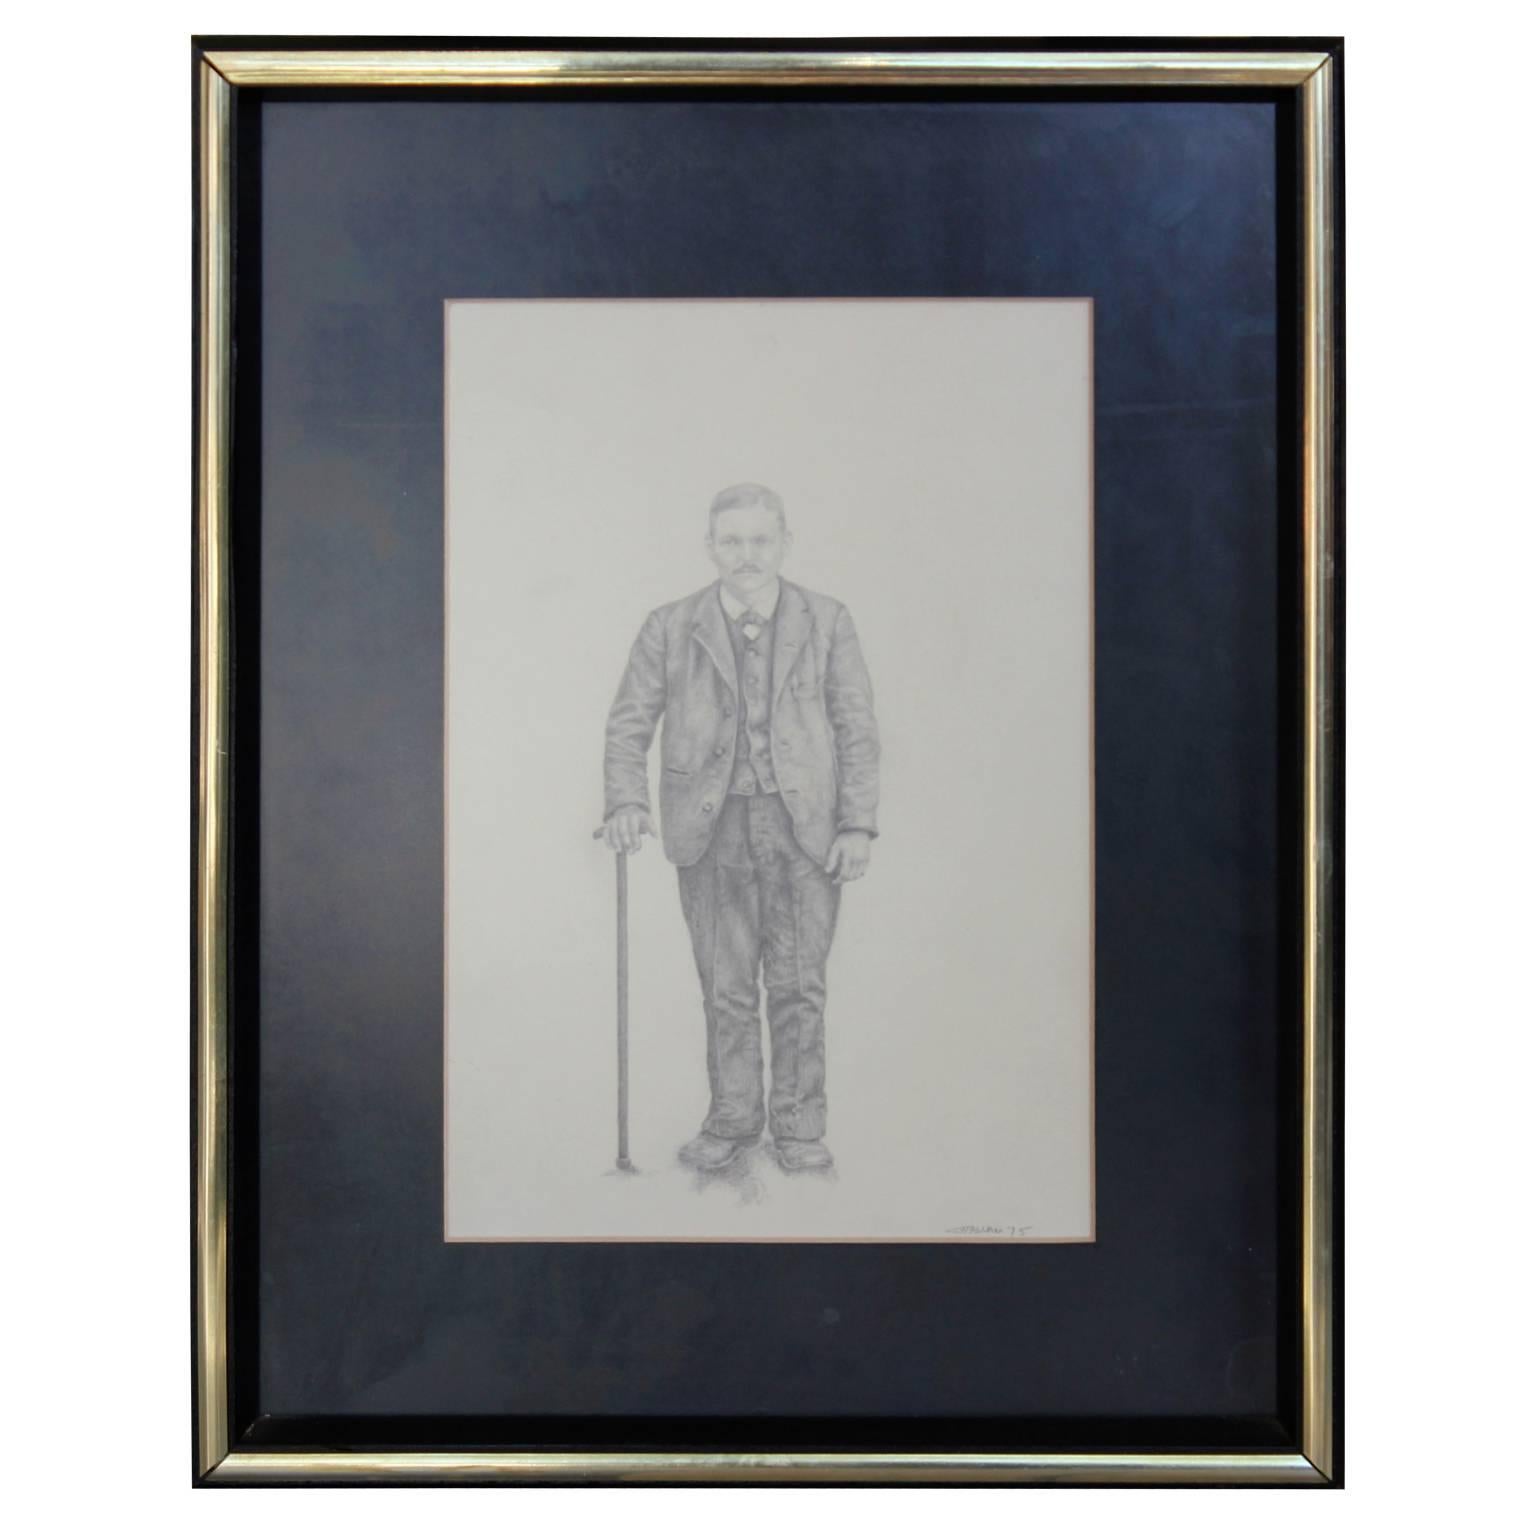 Portrait Sketch of Man with a Cane - Art by C. Hallam